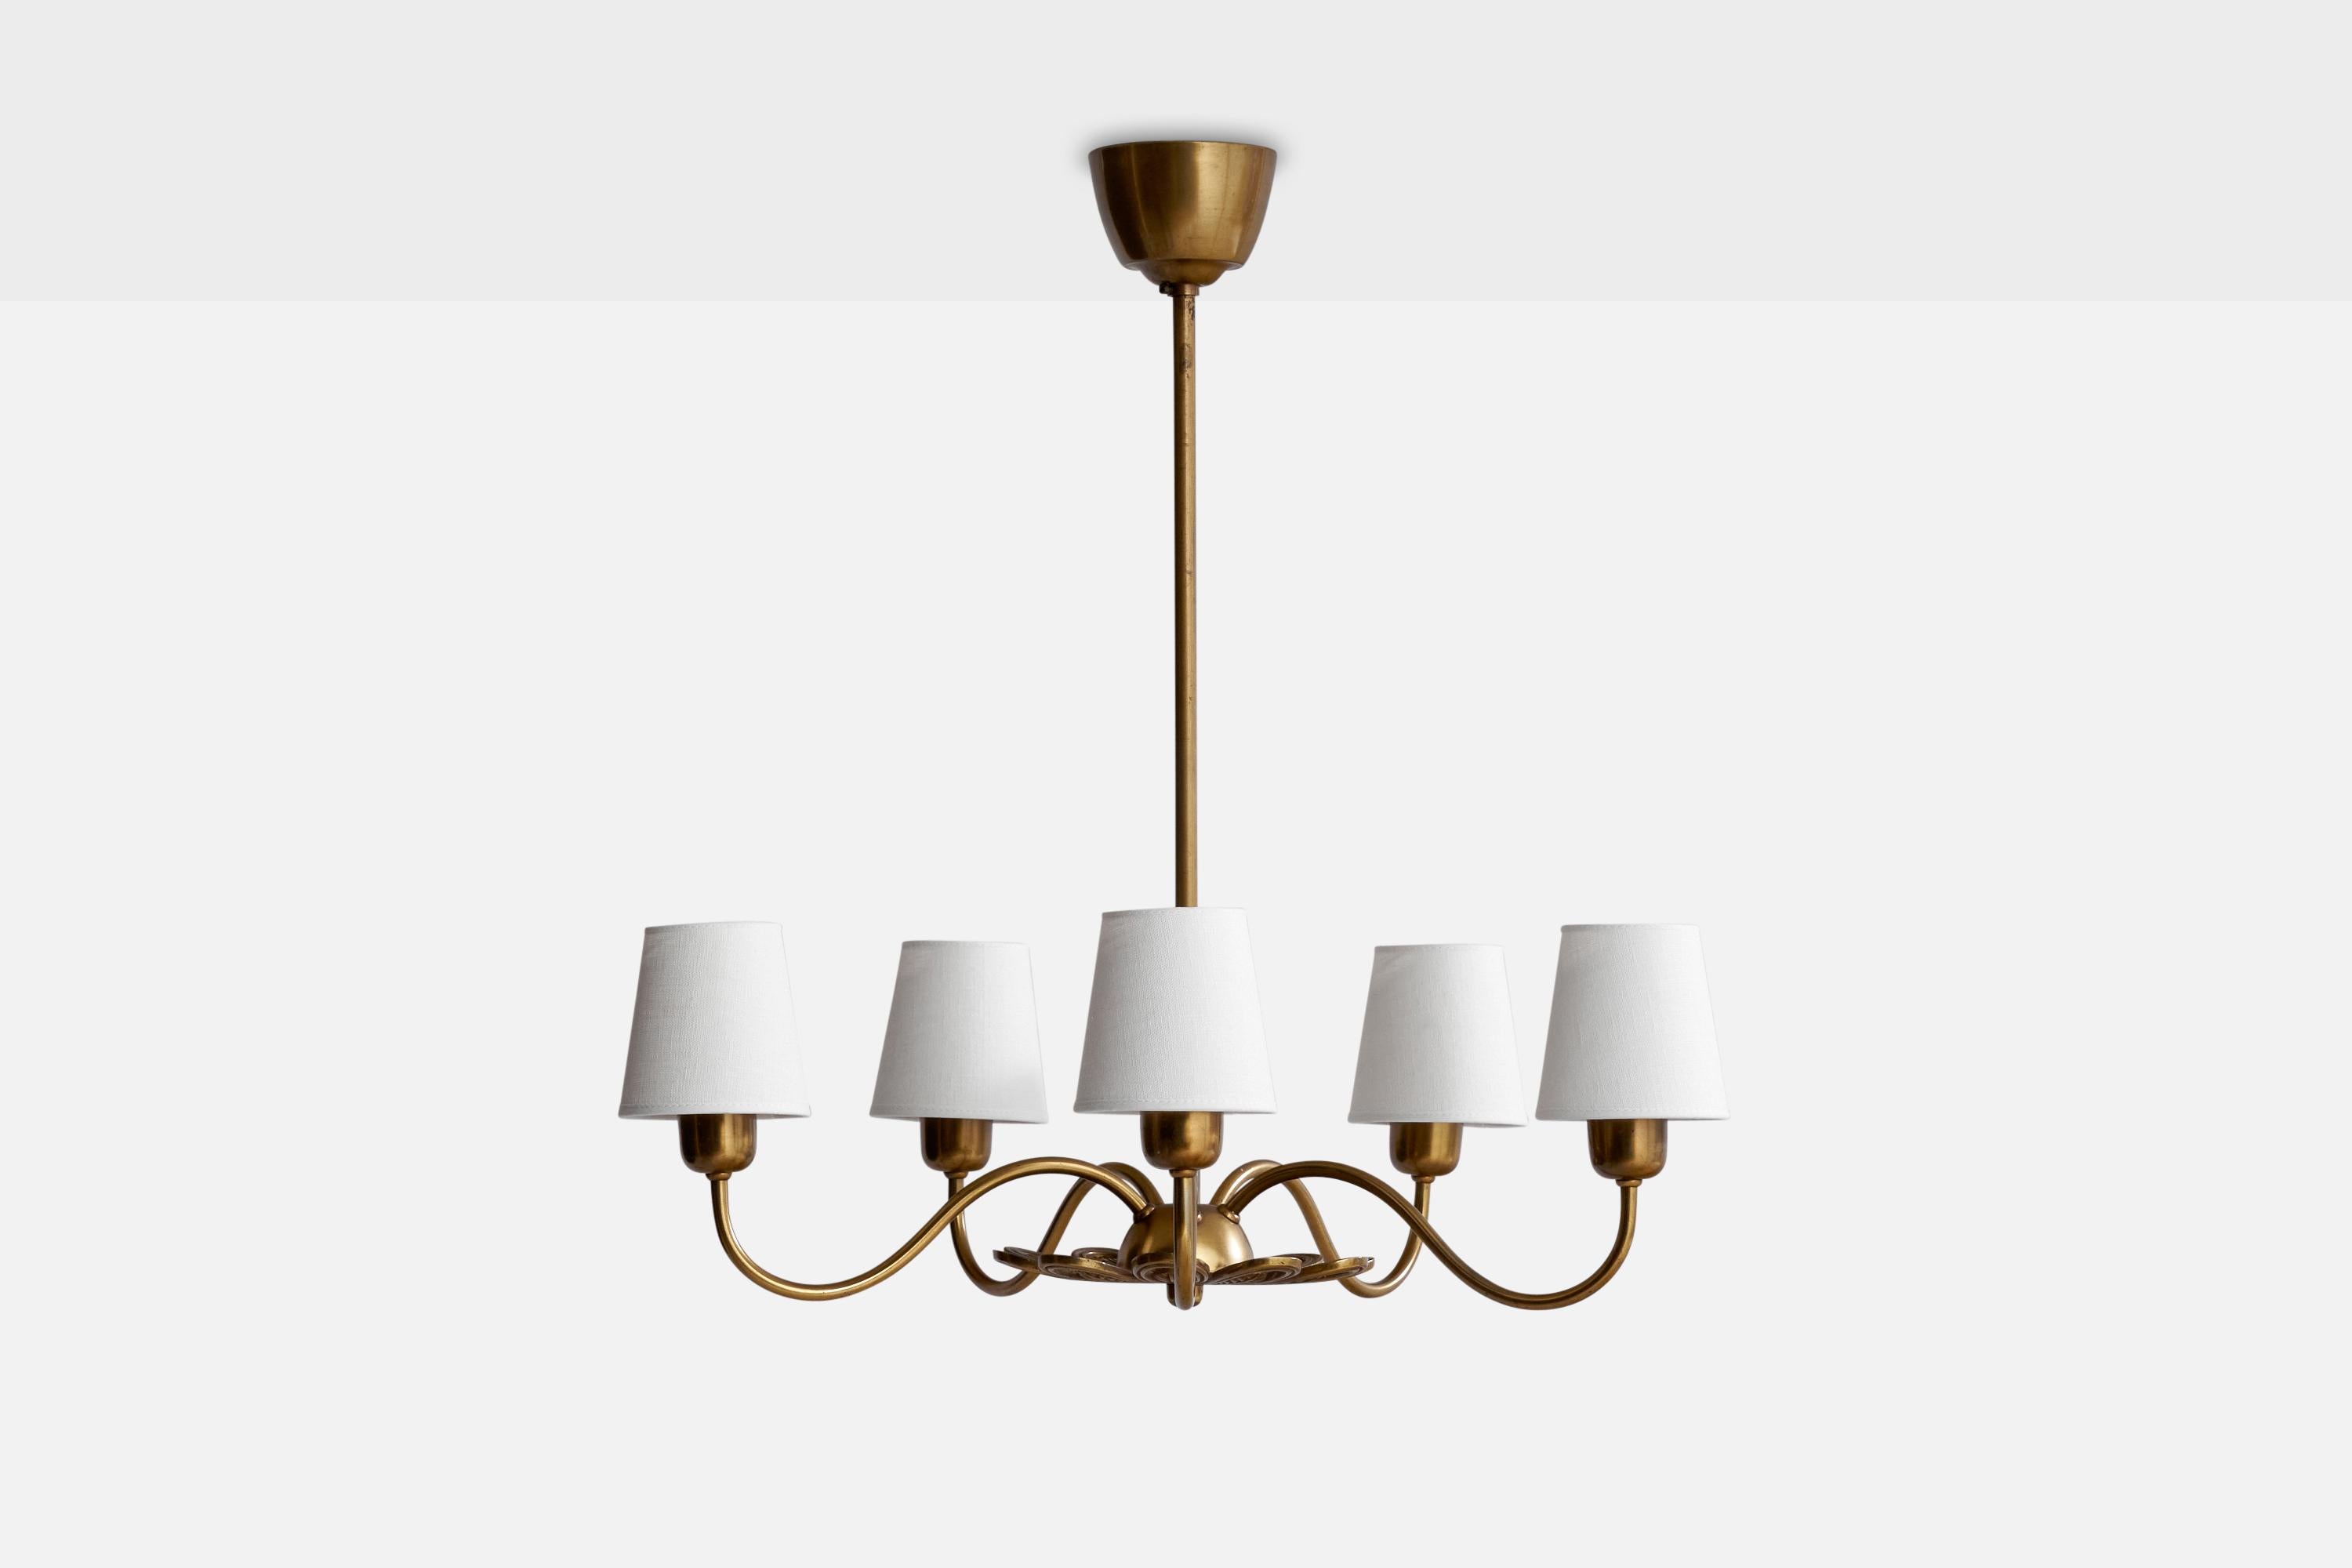 A brass and white fabric chandelier attributed to Hans Bergström för Ateljé Lyktan, Sweden, 1940s.

Dimensions of canopy (inches): 3.5” H x 4” Diameter
Socket takes standard E-26 bulbs. 5 socketsThere is no maximum wattage stated on the fixture. All